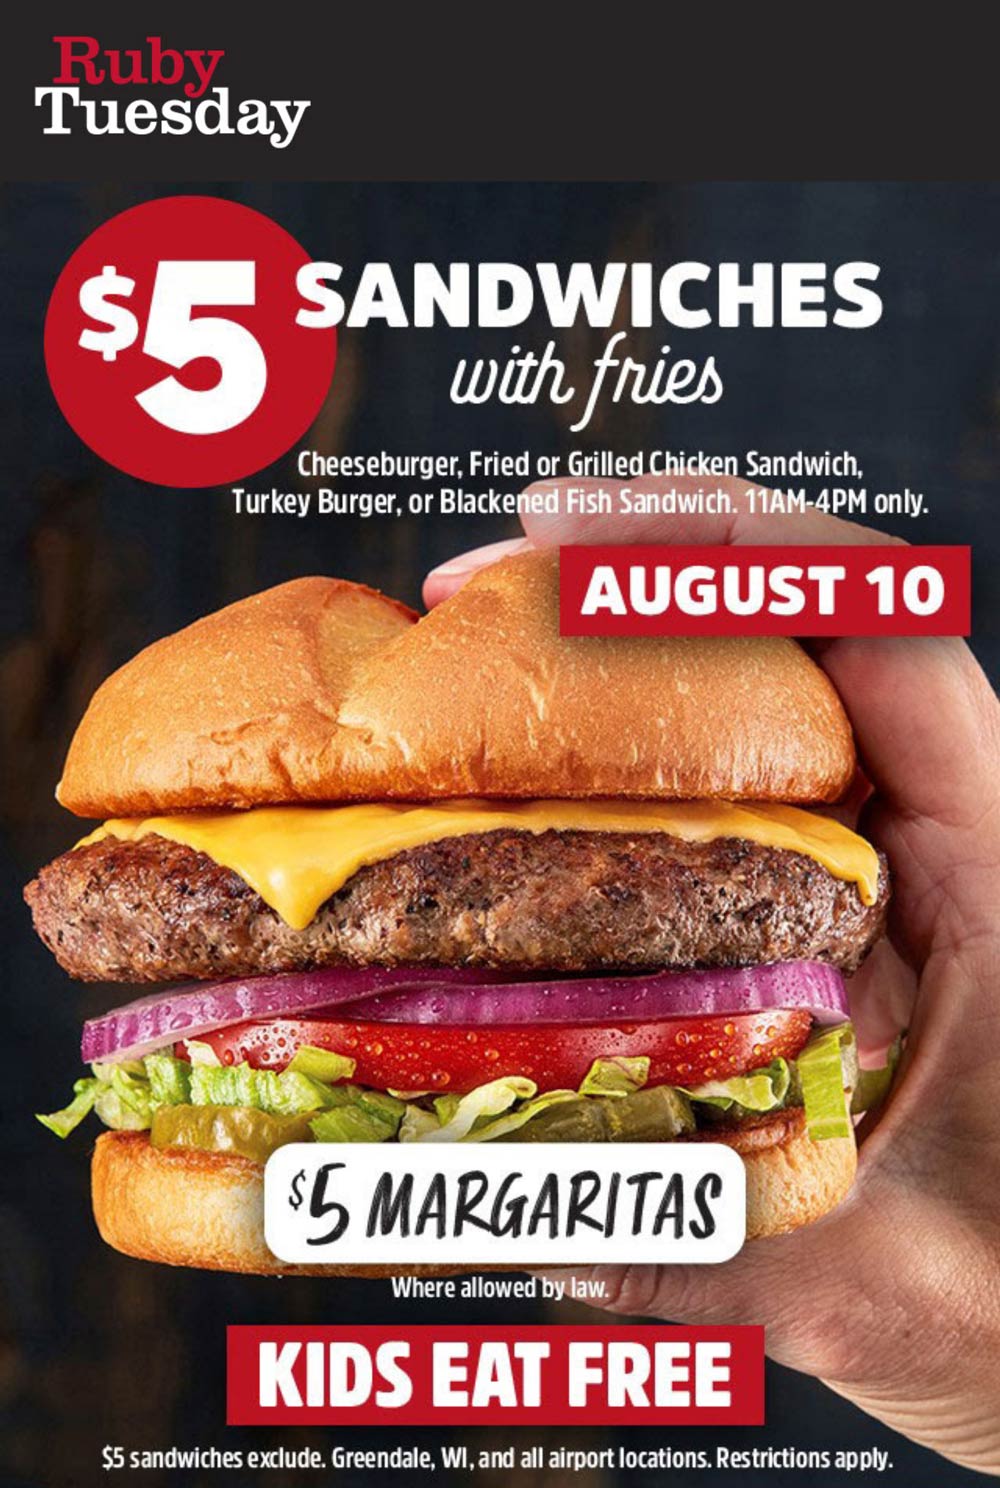 Ruby Tuesday restaurants Coupon  $5 cheeseburger, chicken sandwich or fish + fries til 4p today at Ruby Tuesday #rubytuesday 